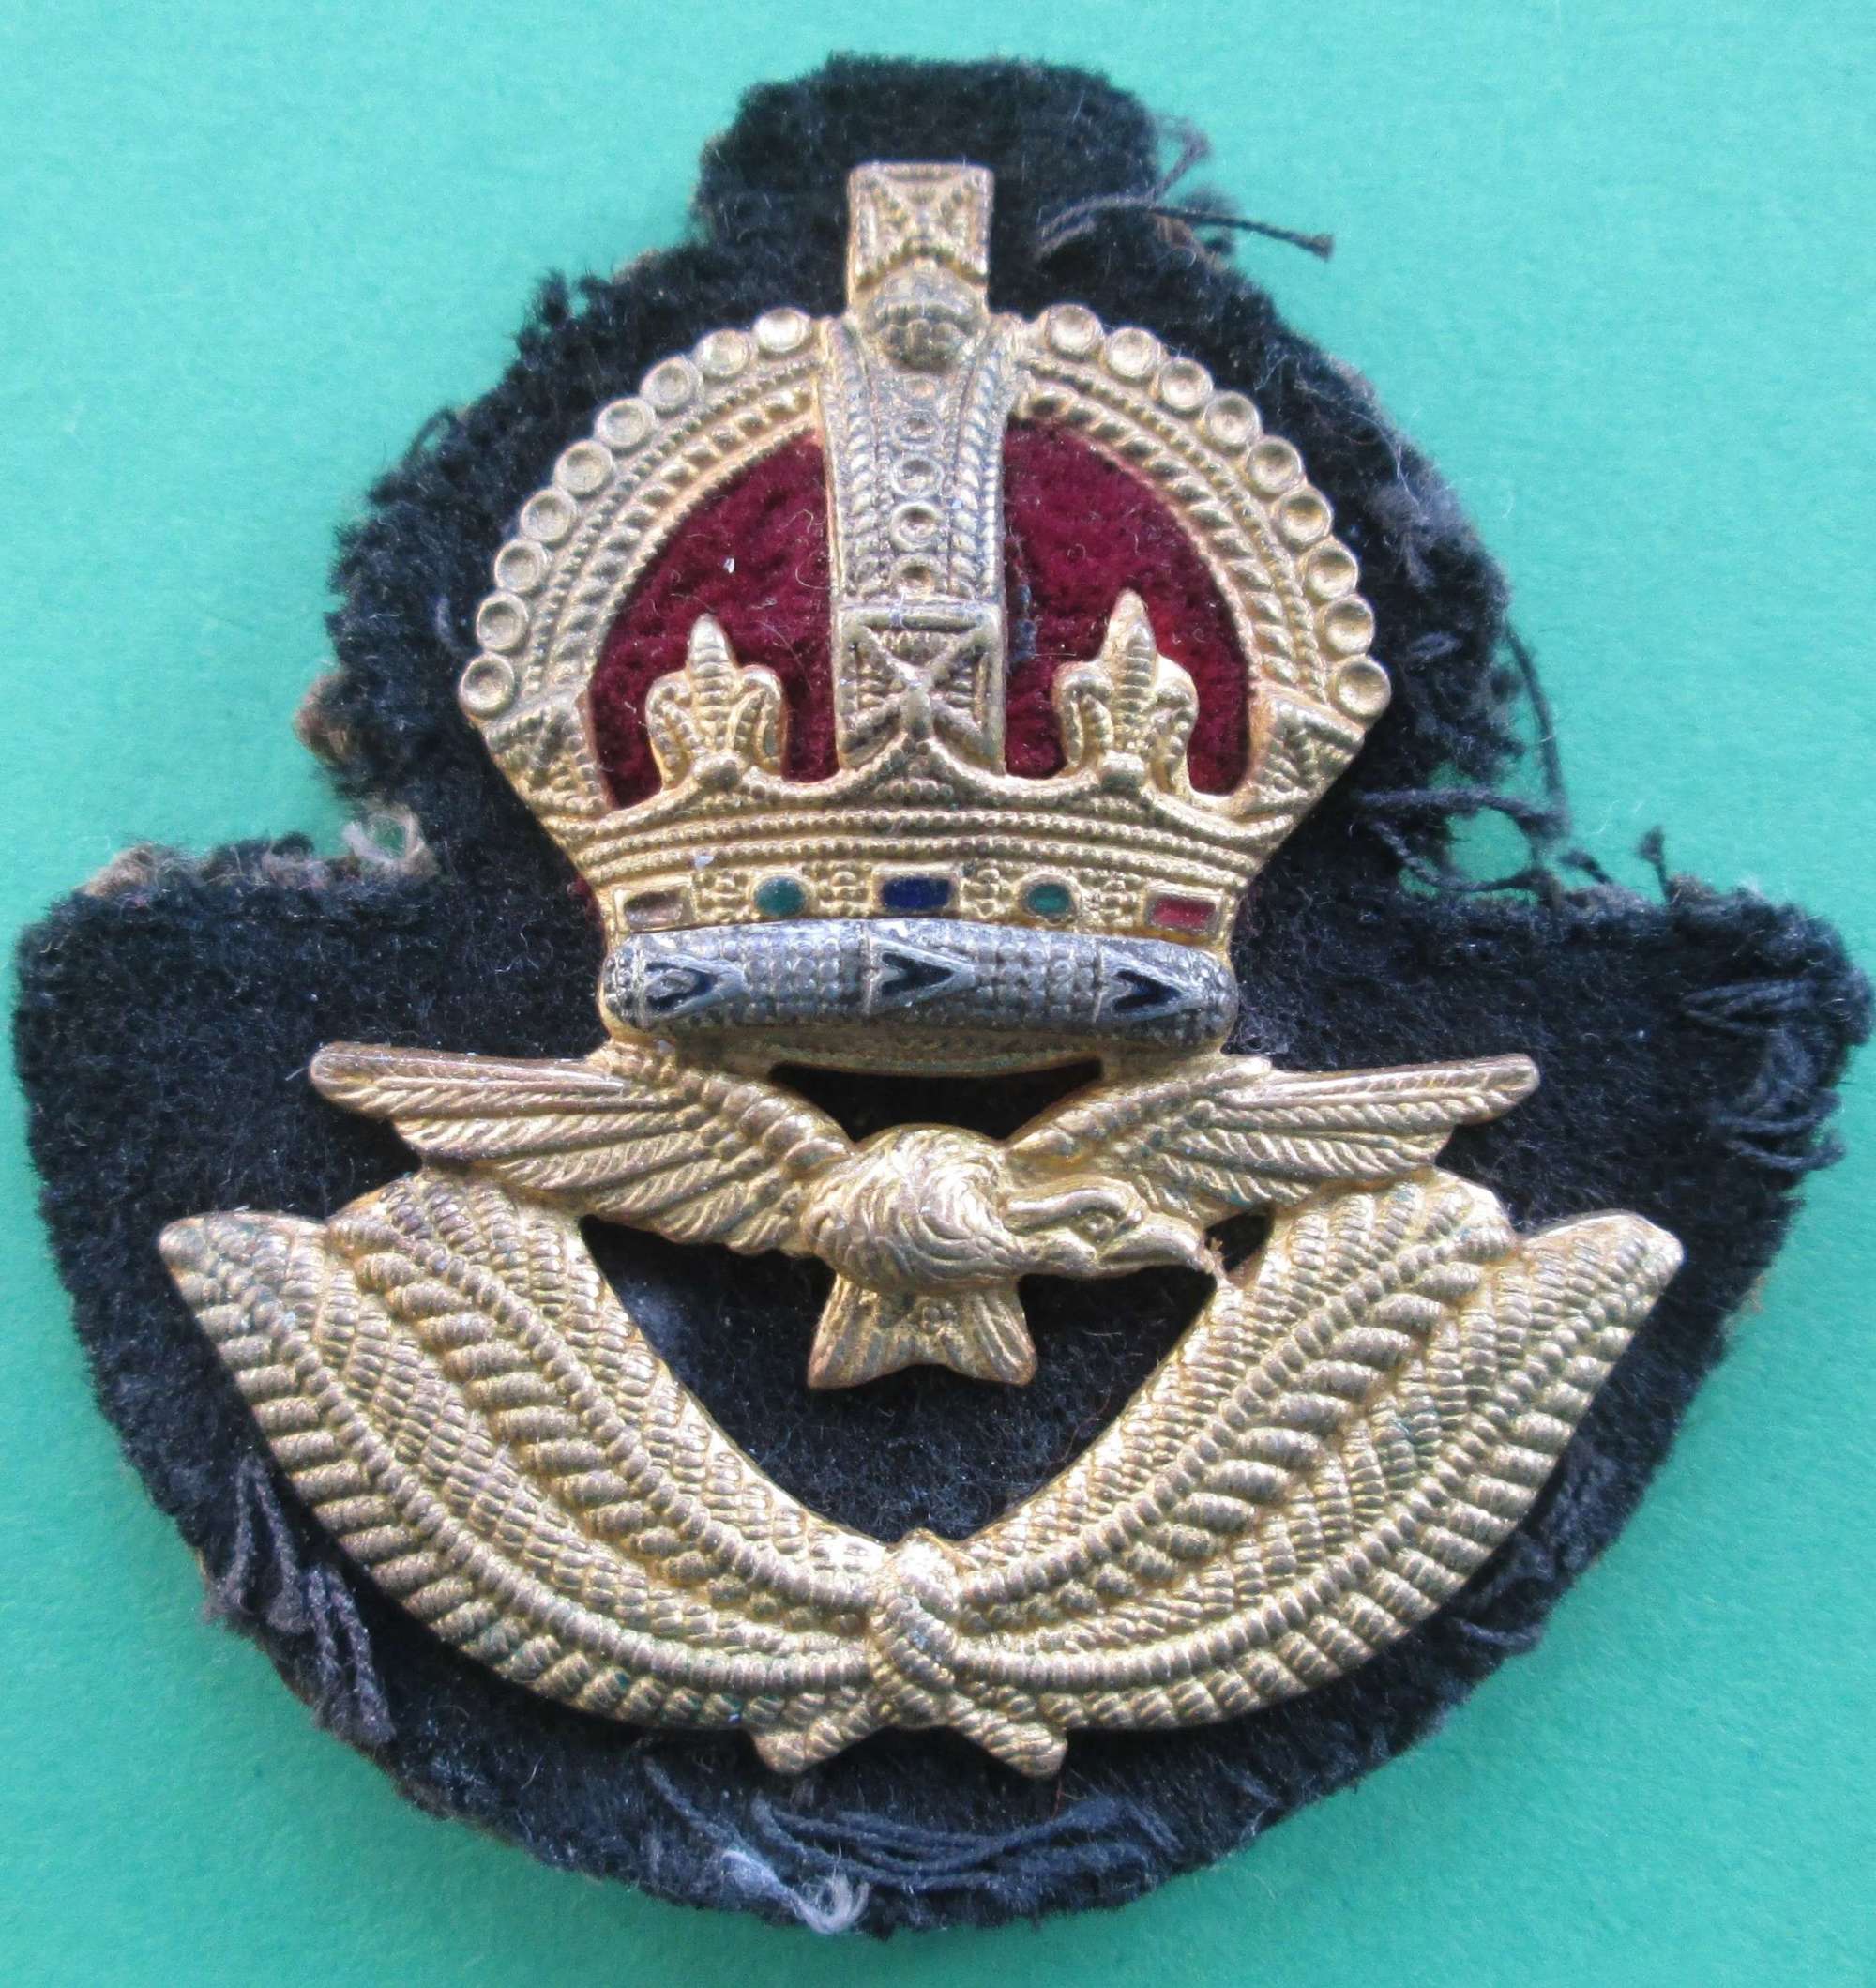 GOOD WWII PERIOD RAF OFFICER'S ECONOMY BERET BADGE